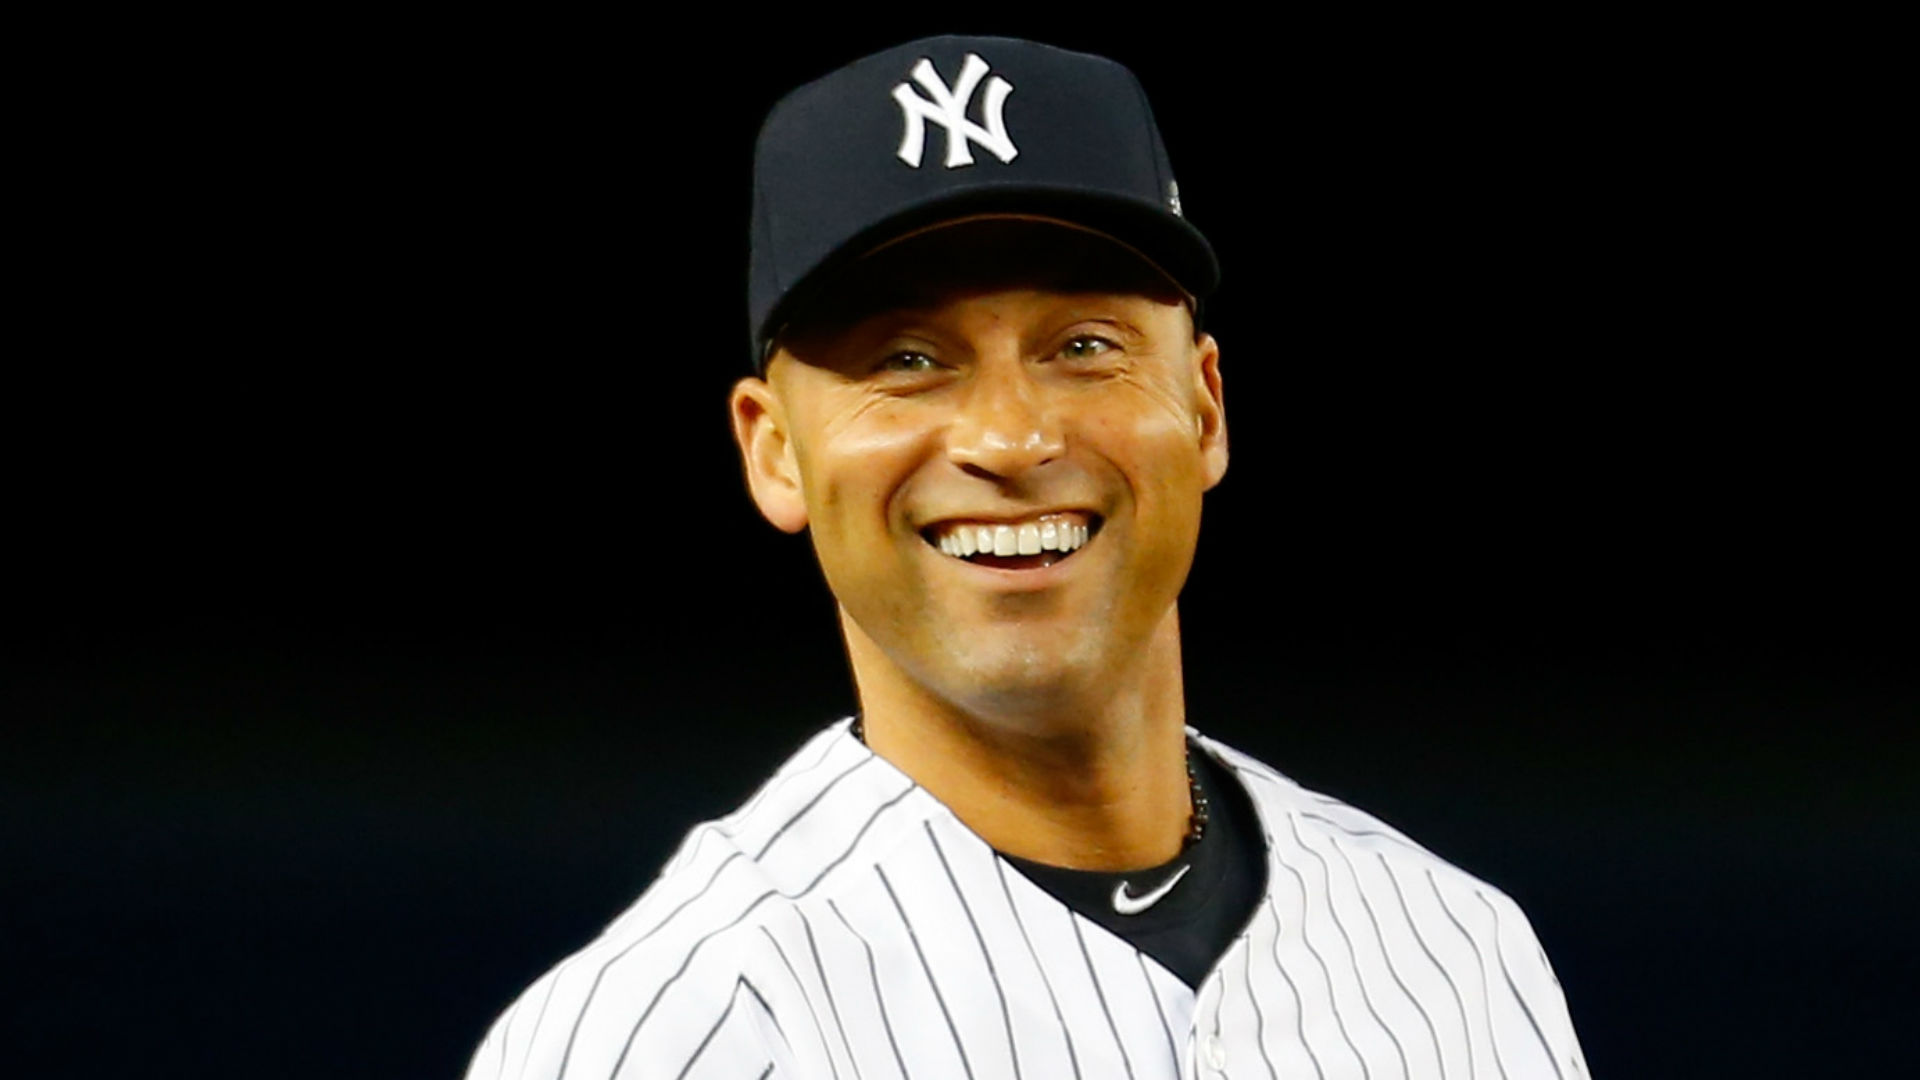 Jeter's No. 2 retired by Yankees; Monument Park plaque unveiled